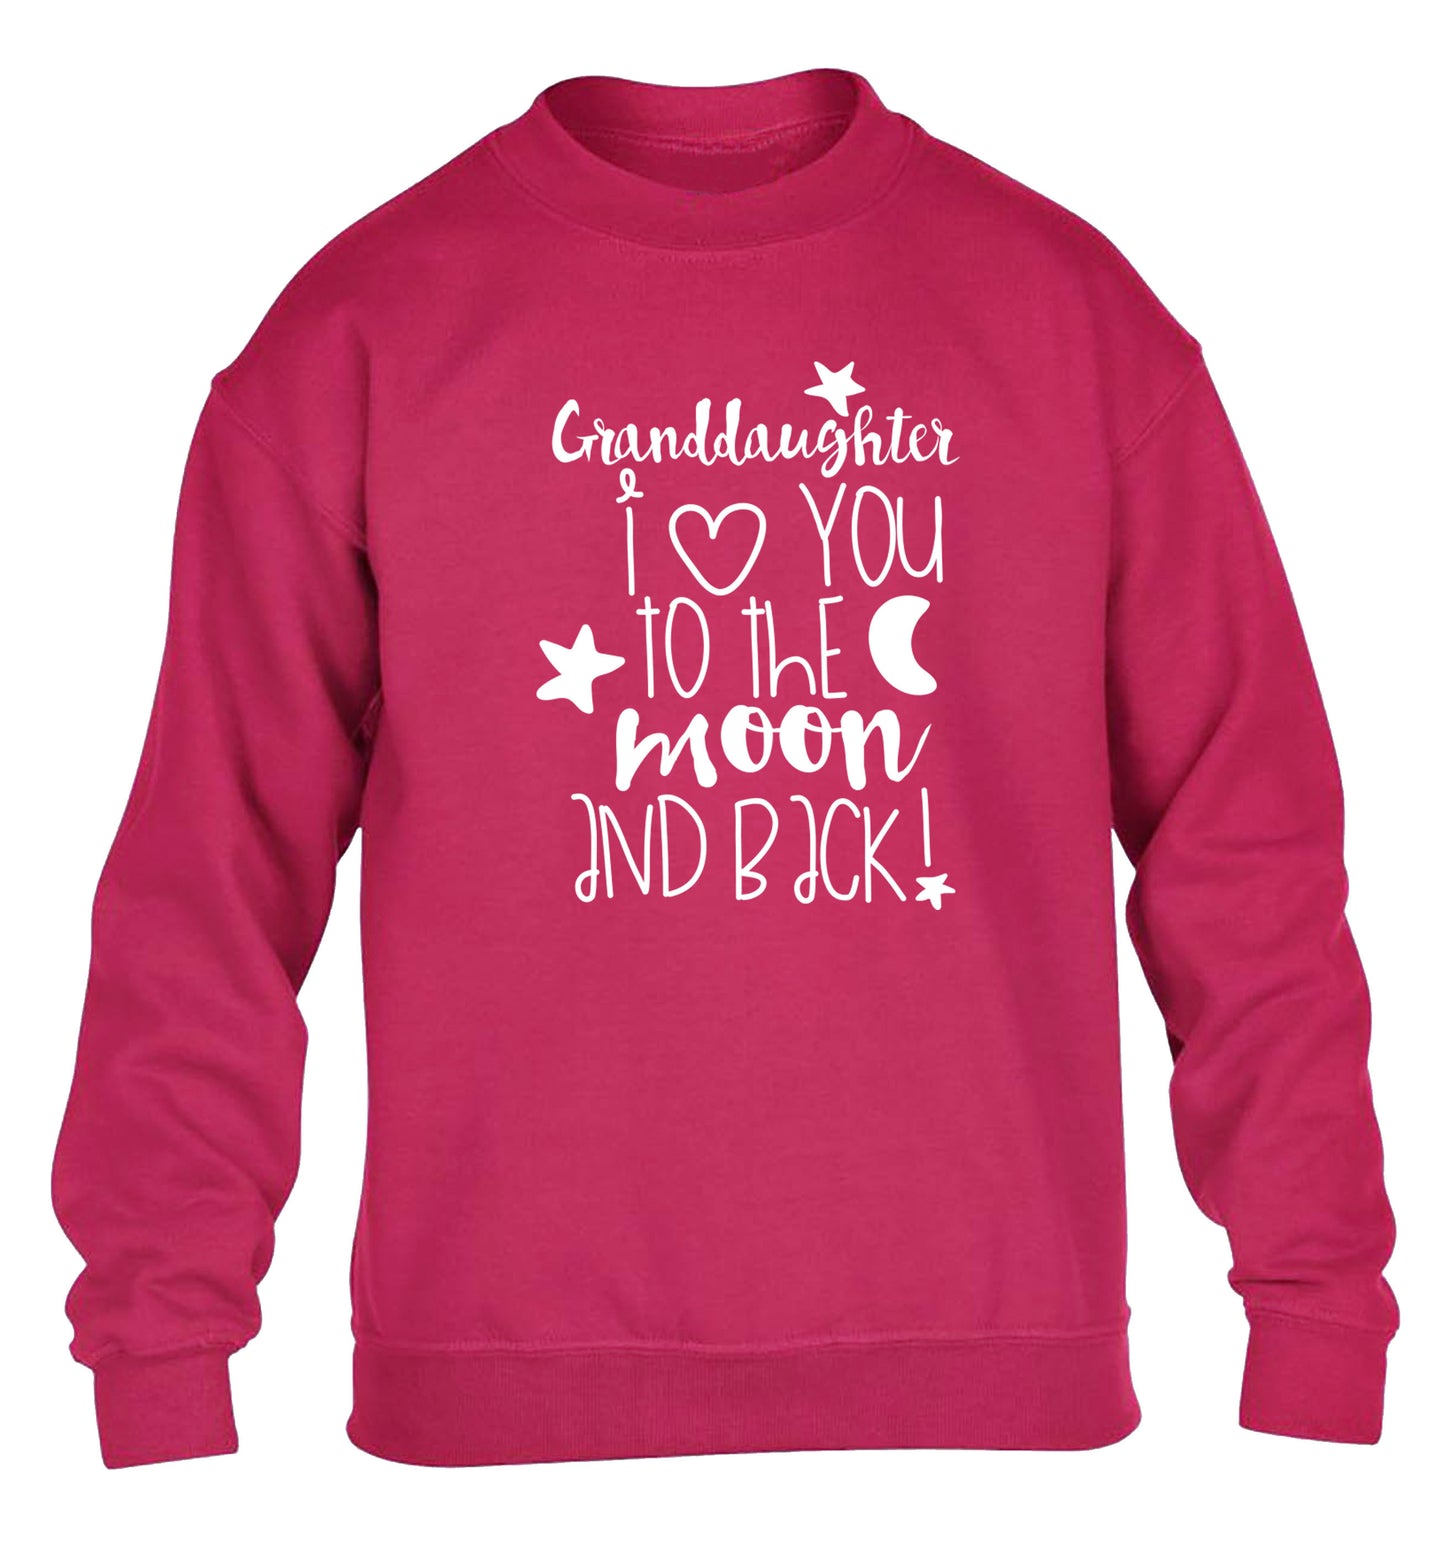 Granddaughter I love you to the moon and back children's pink  sweater 12-14 Years